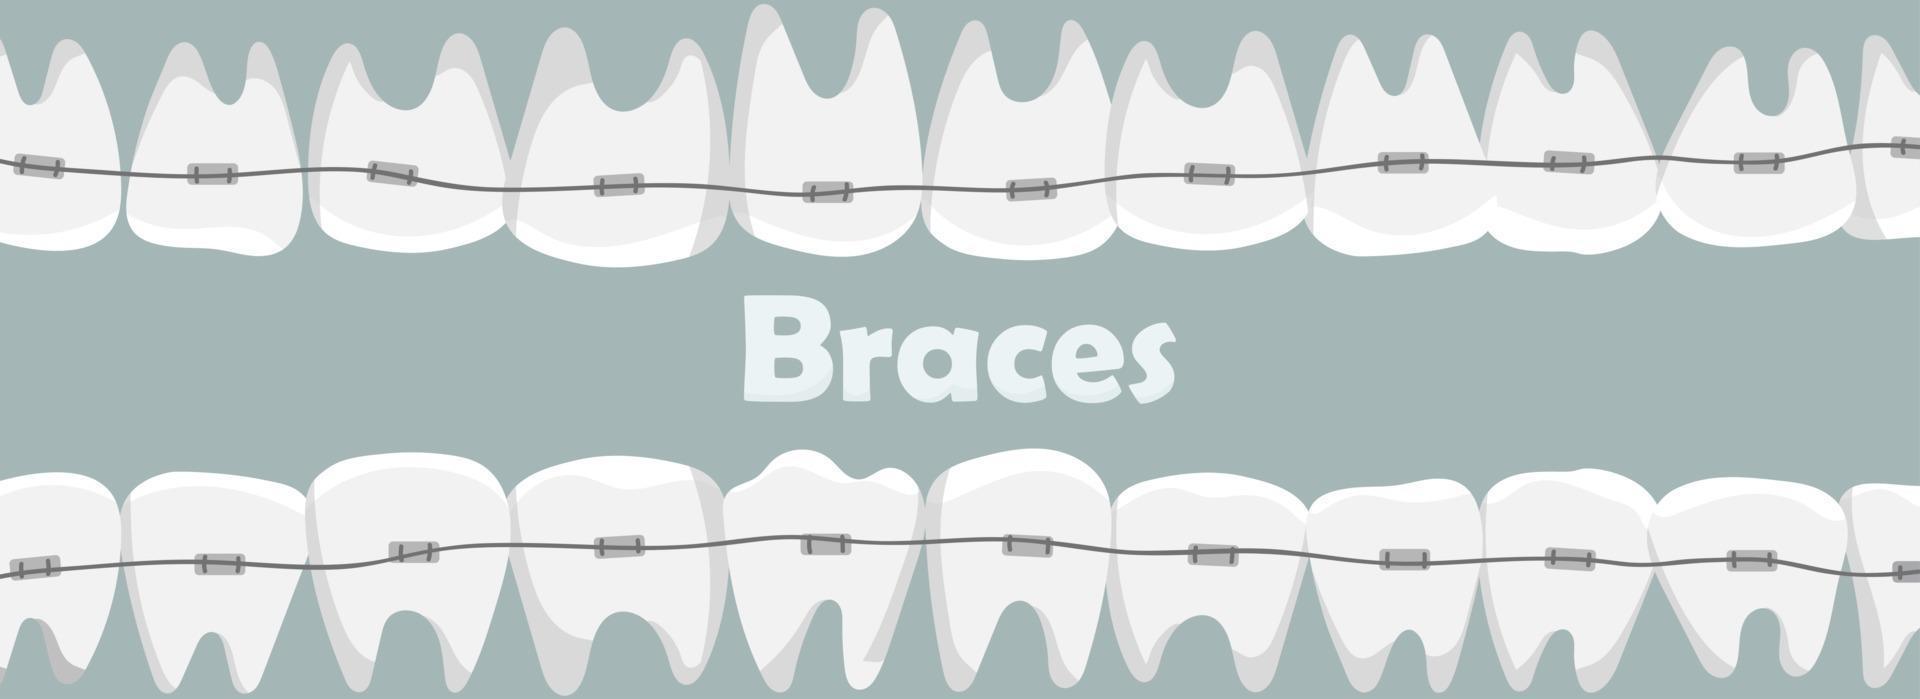 Banner with teeth with braces vector